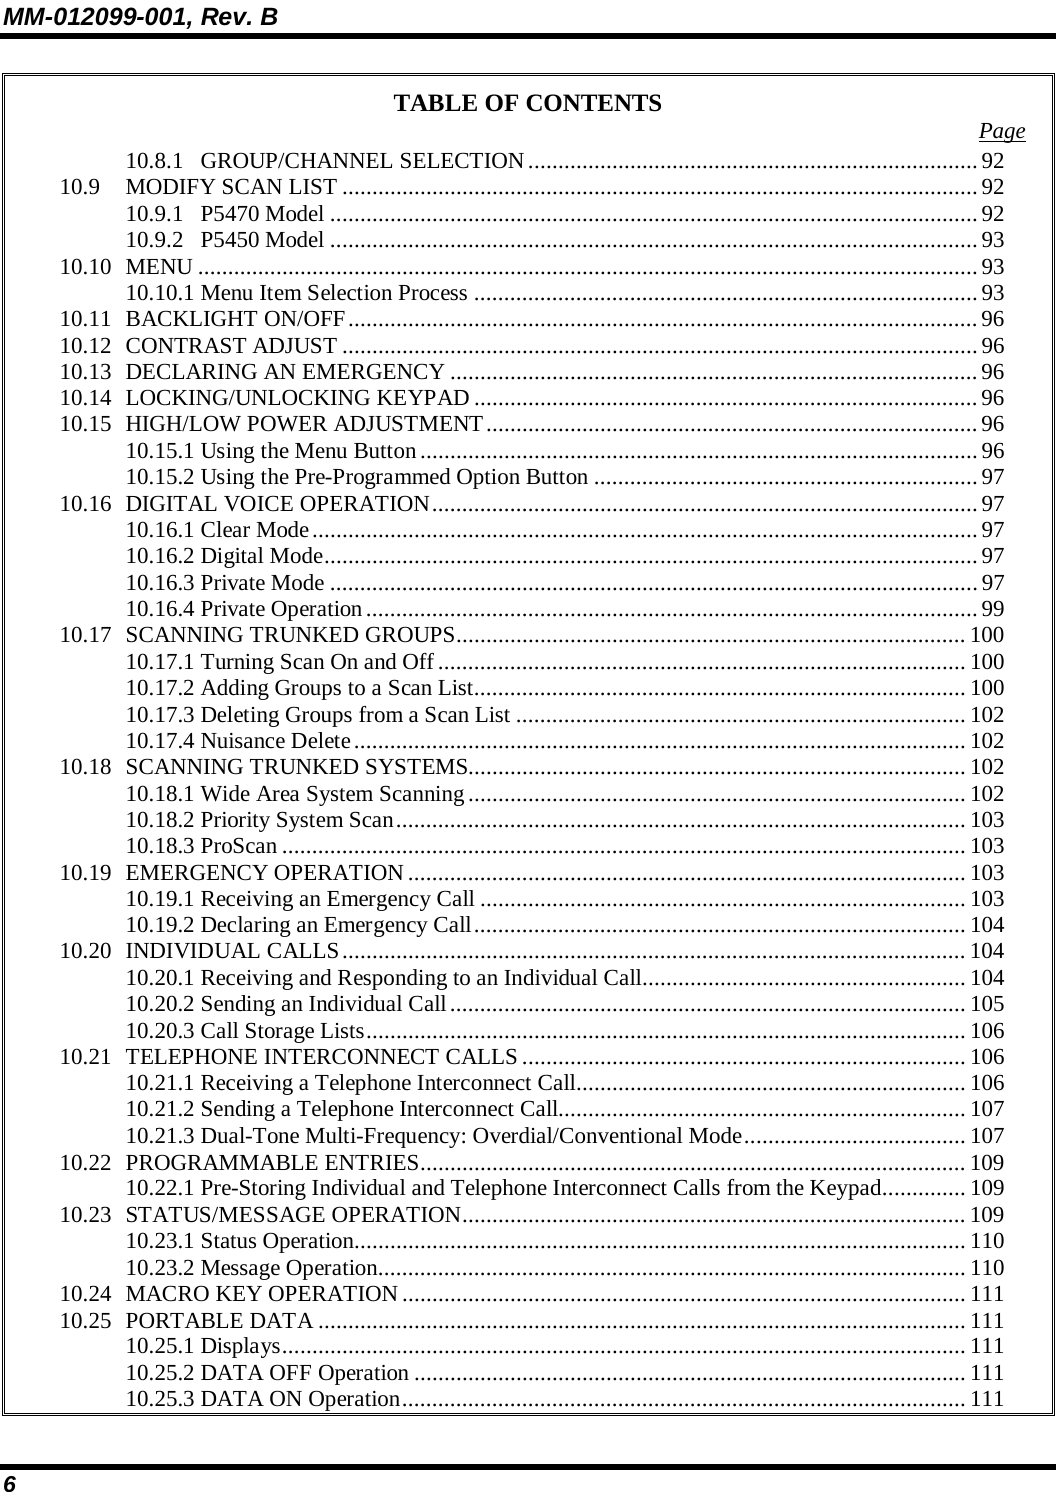 MM-012099-001, Rev. B 6 TABLE OF CONTENTS  Page 10.8.1 GROUP/CHANNEL SELECTION ...........................................................................92 10.9 MODIFY SCAN LIST ..........................................................................................................92 10.9.1 P5470 Model ............................................................................................................ 92 10.9.2 P5450 Model ............................................................................................................ 93 10.10 MENU ..................................................................................................................................93 10.10.1 Menu Item Selection Process ....................................................................................93 10.11 BACKLIGHT ON/OFF......................................................................................................... 96 10.12 CONTRAST ADJUST .......................................................................................................... 96 10.13 DECLARING AN EMERGENCY ........................................................................................ 96 10.14 LOCKING/UNLOCKING KEYPAD ....................................................................................96 10.15 HIGH/LOW POWER ADJUSTMENT..................................................................................96 10.15.1 Using the Menu Button............................................................................................. 96 10.15.2 Using the Pre-Programmed Option Button ................................................................ 97 10.16 DIGITAL VOICE OPERATION...........................................................................................97 10.16.1 Clear Mode...............................................................................................................97 10.16.2 Digital Mode.............................................................................................................97 10.16.3 Private Mode ............................................................................................................ 97 10.16.4 Private Operation......................................................................................................99 10.17 SCANNING TRUNKED GROUPS..................................................................................... 100 10.17.1 Turning Scan On and Off........................................................................................ 100 10.17.2 Adding Groups to a Scan List.................................................................................. 100 10.17.3 Deleting Groups from a Scan List ........................................................................... 102 10.17.4 Nuisance Delete...................................................................................................... 102 10.18 SCANNING TRUNKED SYSTEMS...................................................................................102 10.18.1 Wide Area System Scanning................................................................................... 102 10.18.2 Priority System Scan...............................................................................................103 10.18.3 ProScan .................................................................................................................. 103 10.19 EMERGENCY OPERATION............................................................................................. 103 10.19.1 Receiving an Emergency Call ................................................................................. 103 10.19.2 Declaring an Emergency Call.................................................................................. 104 10.20 INDIVIDUAL CALLS........................................................................................................ 104 10.20.1 Receiving and Responding to an Individual Call...................................................... 104 10.20.2 Sending an Individual Call...................................................................................... 105 10.20.3 Call Storage Lists.................................................................................................... 106 10.21 TELEPHONE INTERCONNECT CALLS .......................................................................... 106 10.21.1 Receiving a Telephone Interconnect Call................................................................. 106 10.21.2 Sending a Telephone Interconnect Call.................................................................... 107 10.21.3 Dual-Tone Multi-Frequency: Overdial/Conventional Mode..................................... 107 10.22 PROGRAMMABLE ENTRIES........................................................................................... 109 10.22.1 Pre-Storing Individual and Telephone Interconnect Calls from the Keypad.............. 109 10.23 STATUS/MESSAGE OPERATION.................................................................................... 109 10.23.1 Status Operation......................................................................................................110 10.23.2 Message Operation.................................................................................................. 110 10.24 MACRO KEY OPERATION.............................................................................................. 111 10.25 PORTABLE DATA ............................................................................................................111 10.25.1 Displays.................................................................................................................. 111 10.25.2 DATA OFF Operation ............................................................................................ 111 10.25.3 DATA ON Operation.............................................................................................. 111 